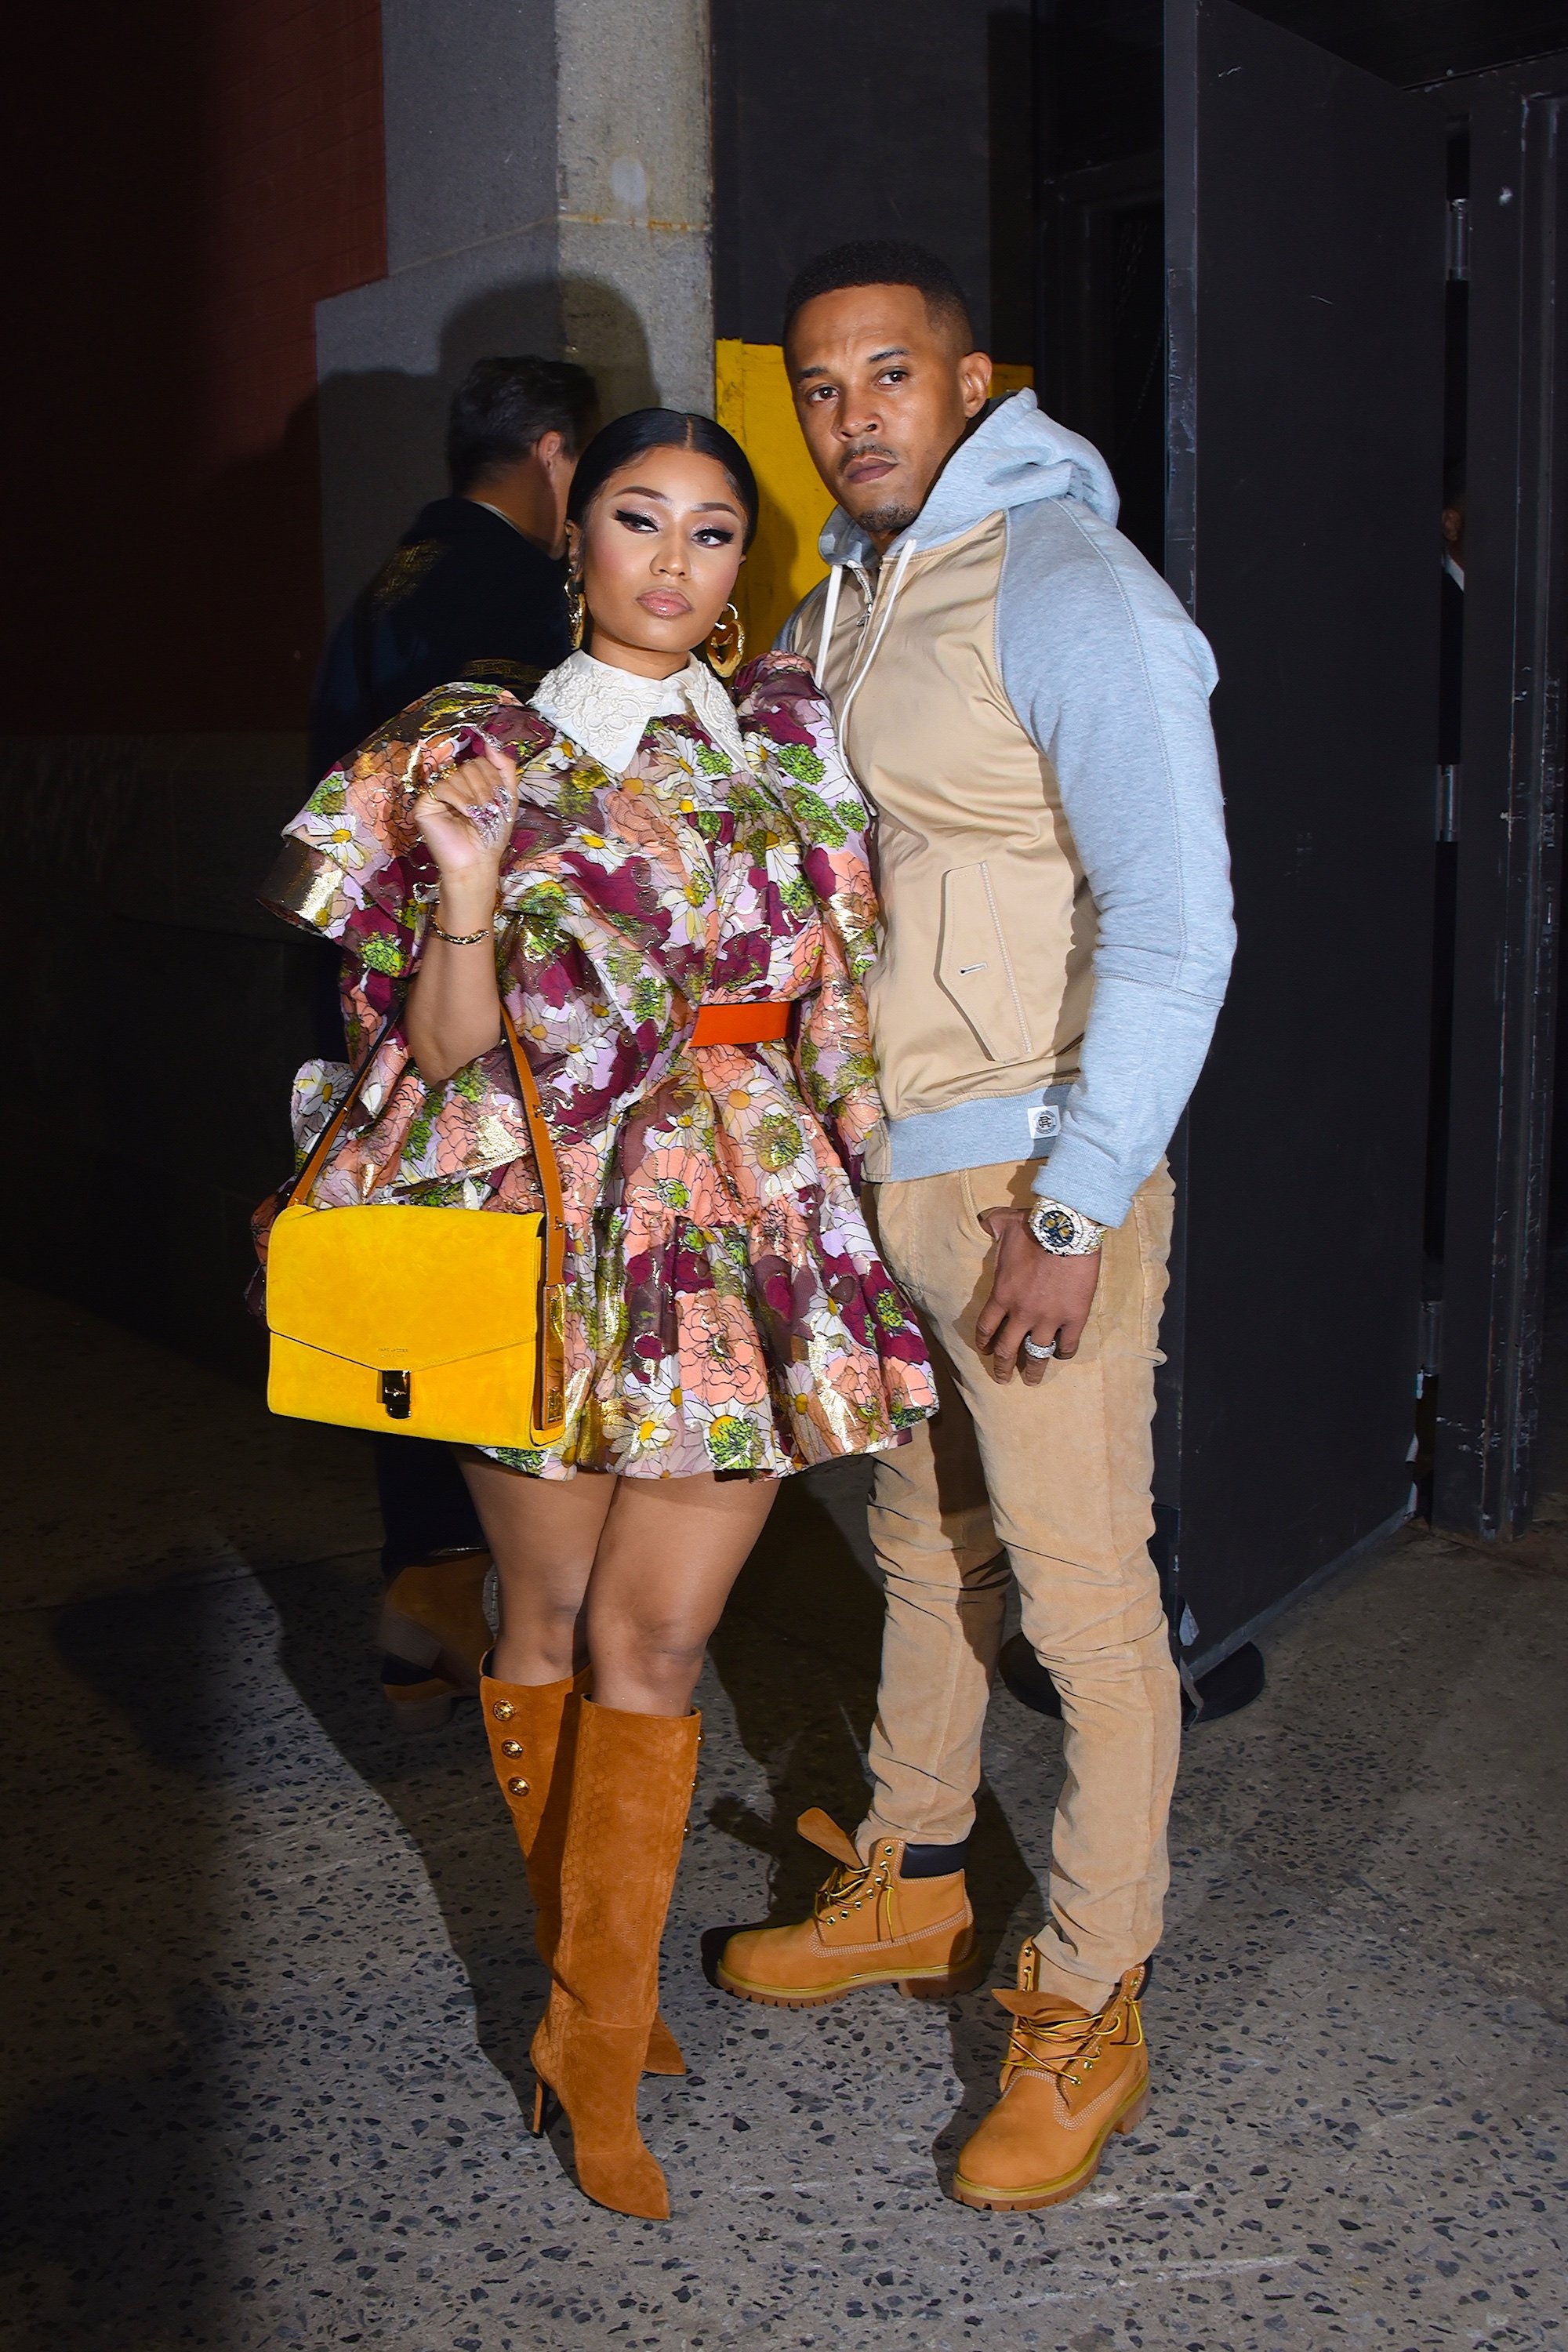 Nicki Minaj and husband Kenneth Petty seen at a Marc Jacobs NYFW event in Manhattan on February 12, 2020 in New York City | Photo: GettyImages